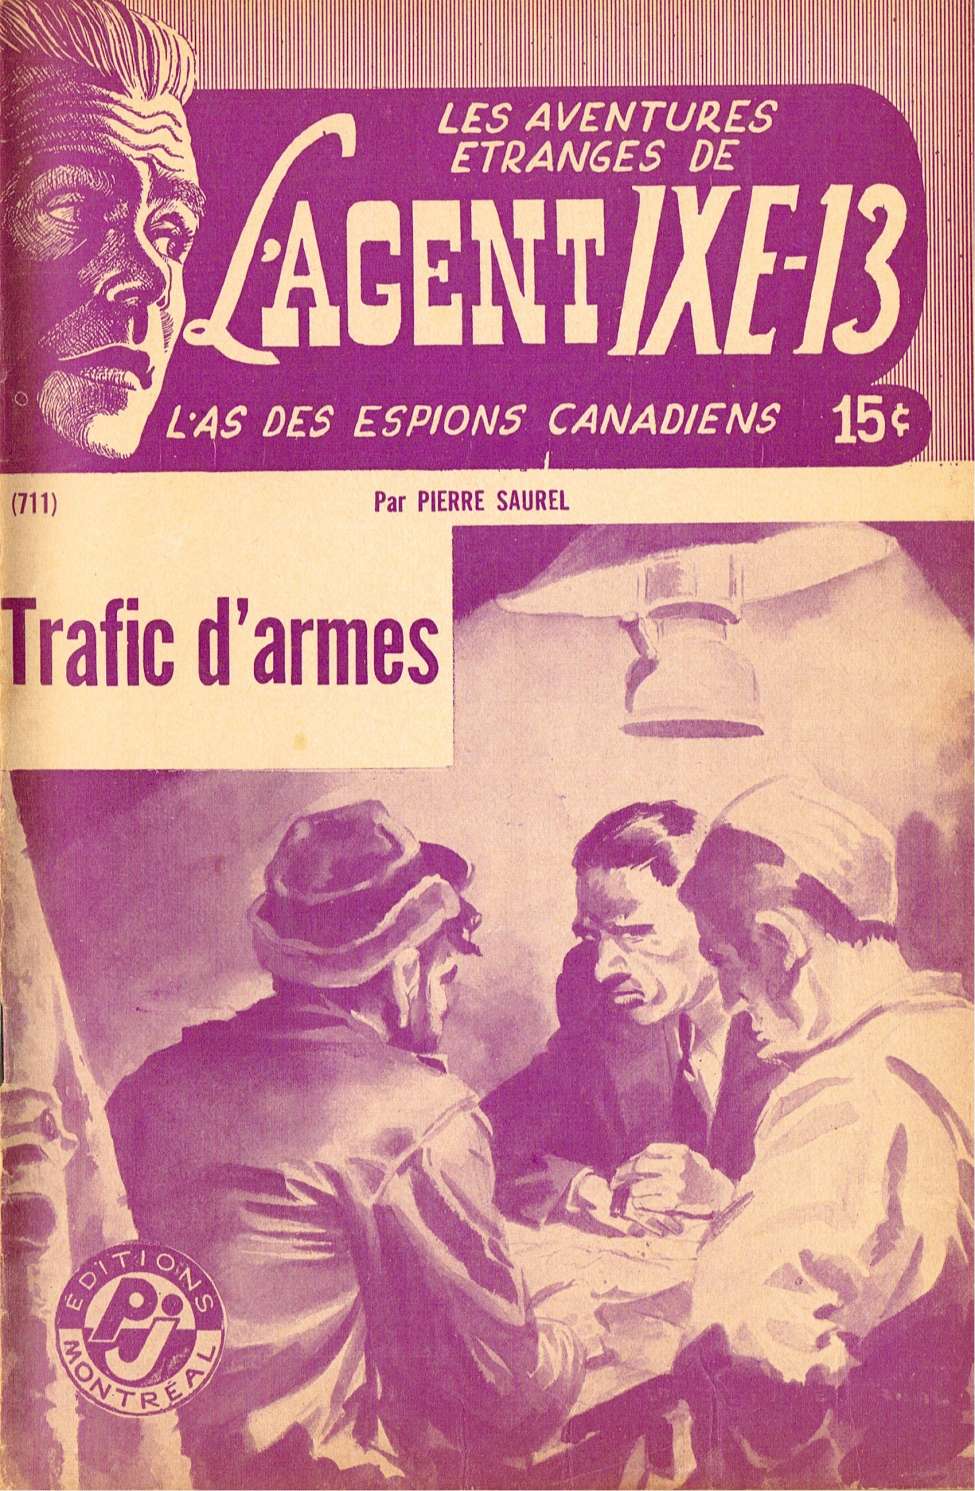 Book Cover For L'Agent IXE-13 v2 711 - Trafic d'armes